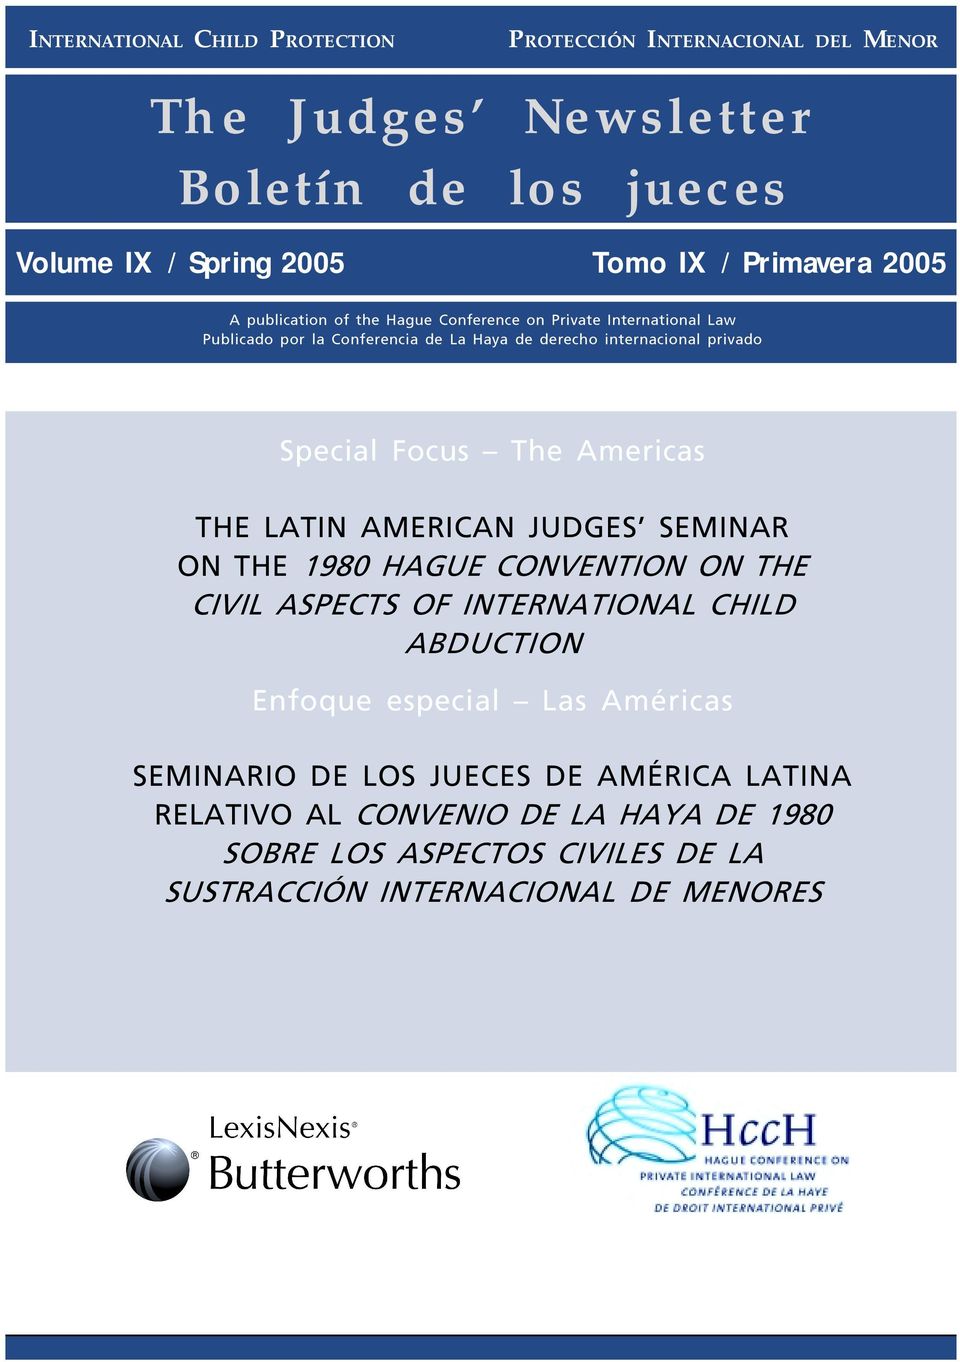 Americas THE LATIN AMERICAN JUDGES SEMINAR ON THE 1980 HAGUE CONVENTION ON THE CIVIL ASPECTS OF INTERNATIONAL CHILD ABDUCTION Enfoque especial Las